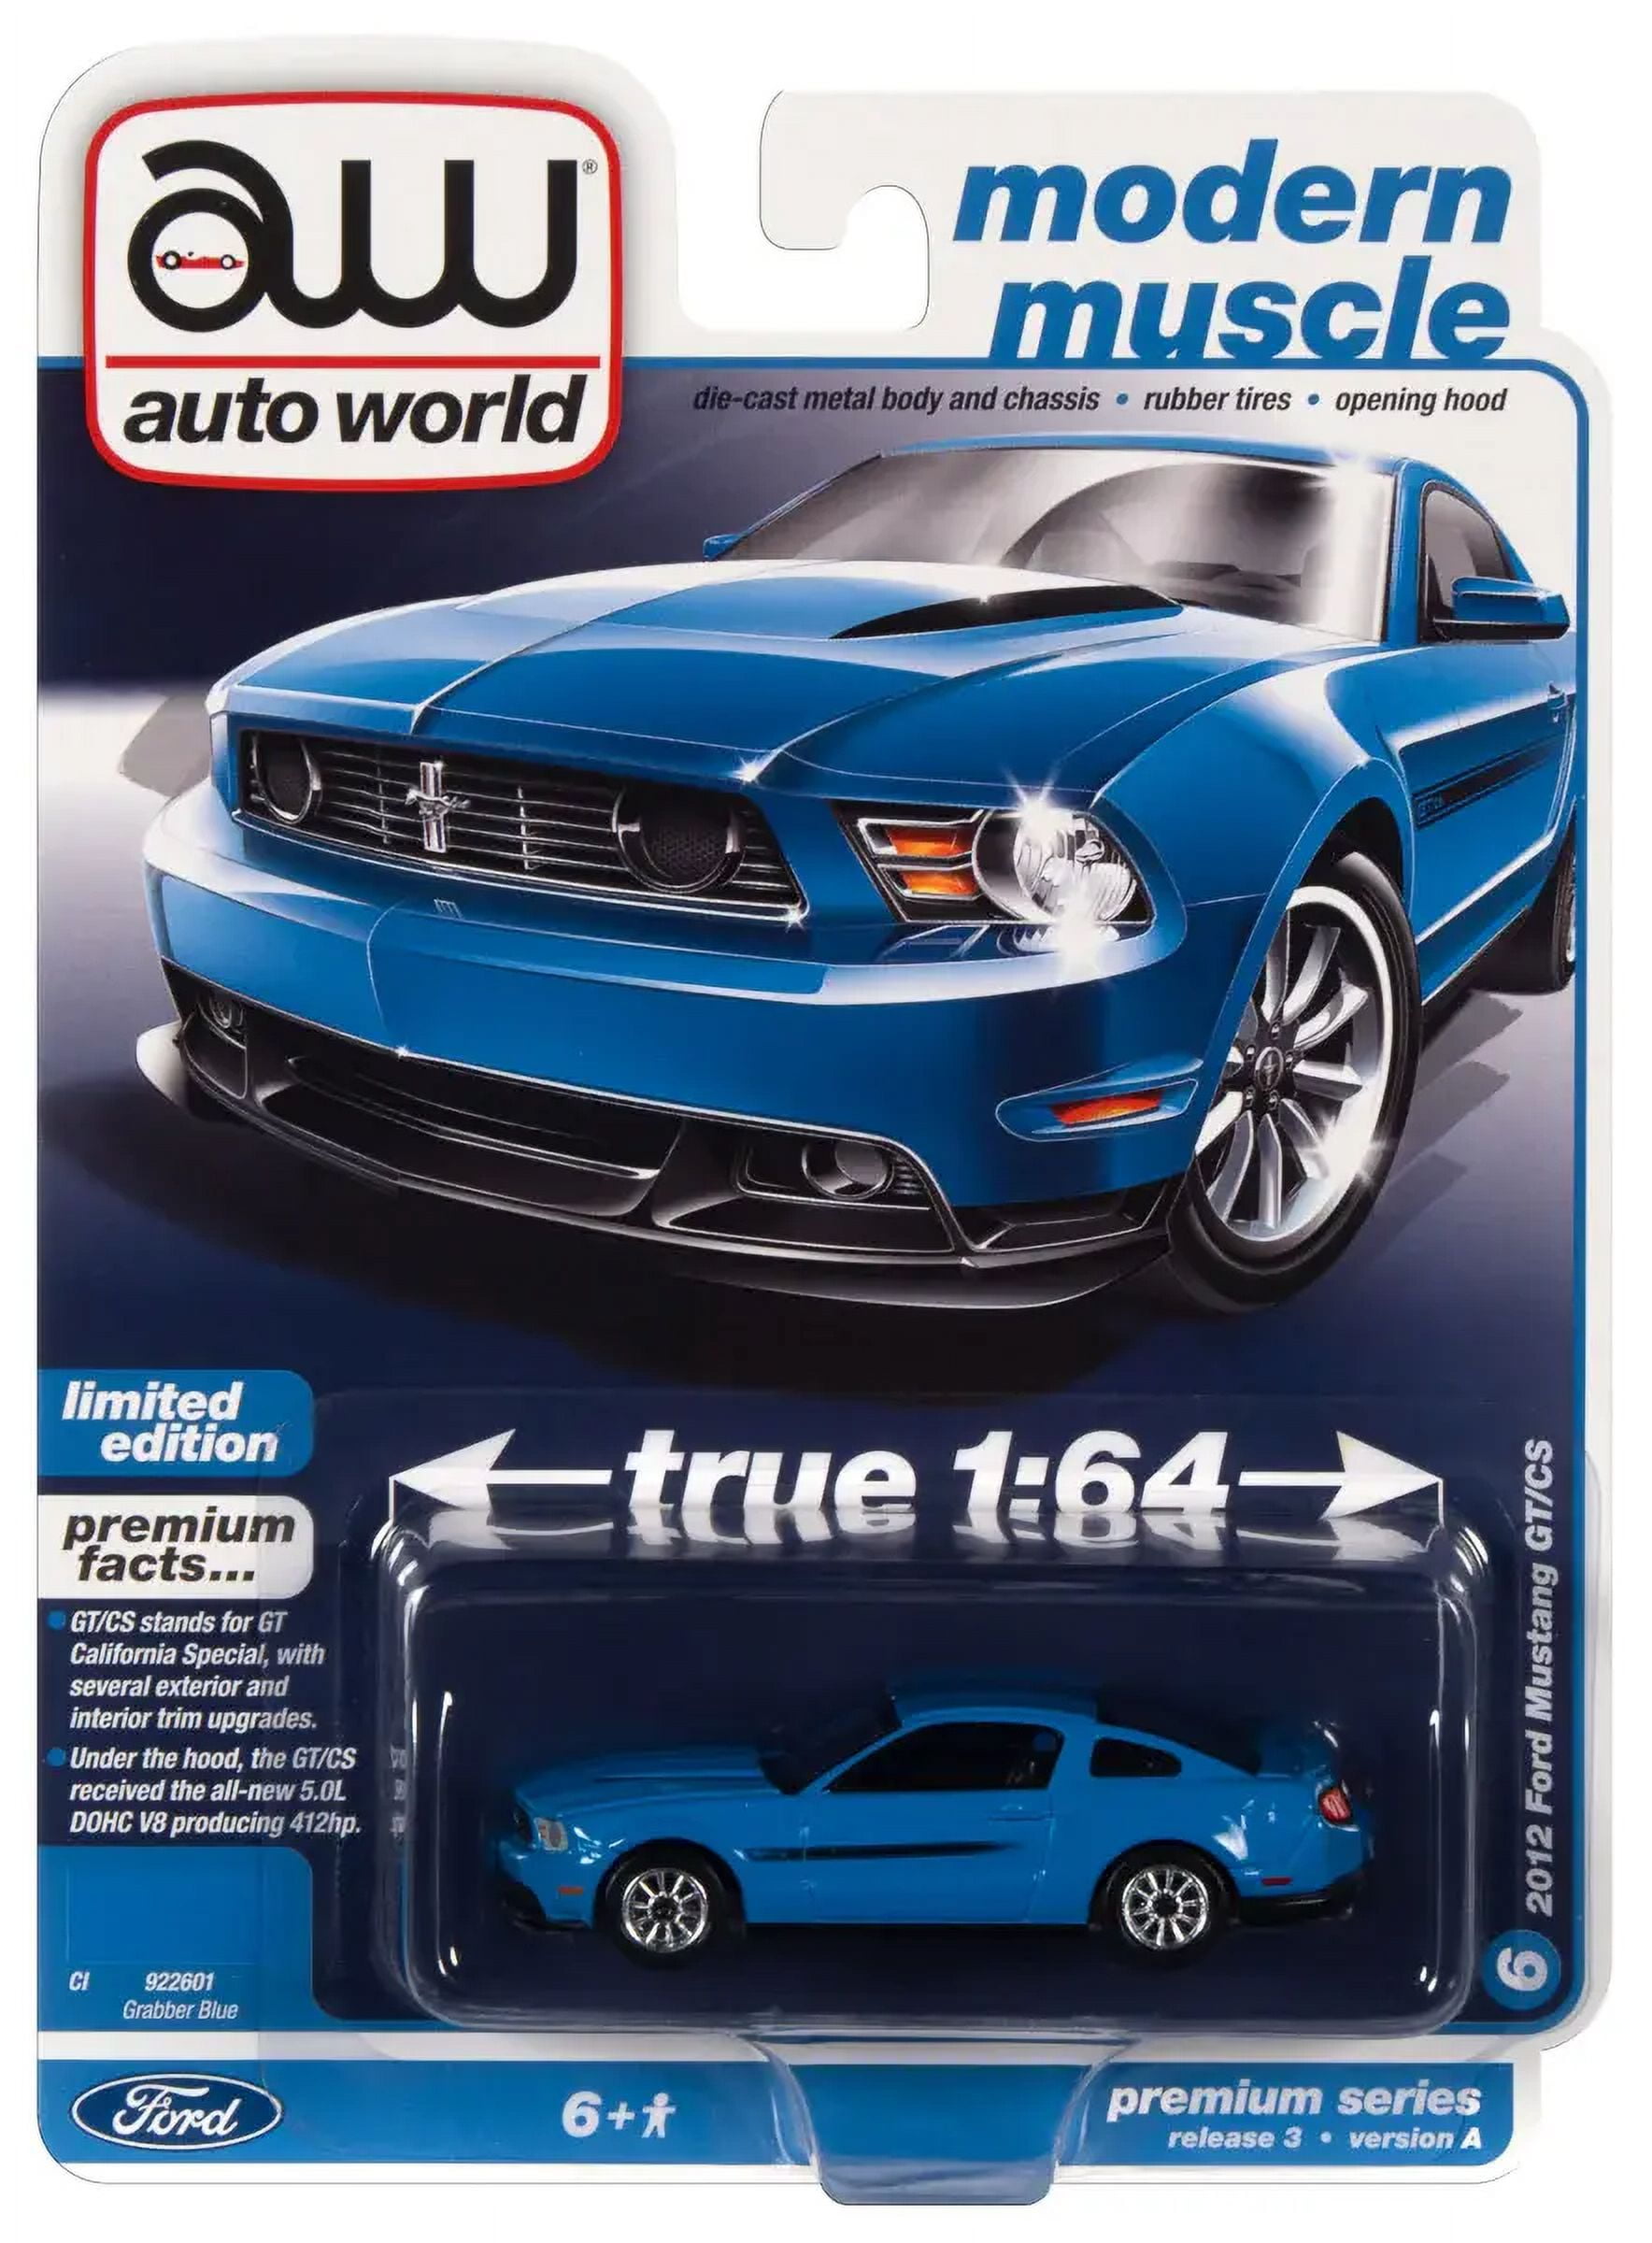 Autoworld 64372-AWSP112A 2012 Ford Mustang GT-CS Grabber Blue with Black Stripes Modern Muscle Limited Edition 1-64 Diecast Model Car -  AUTO WORLD